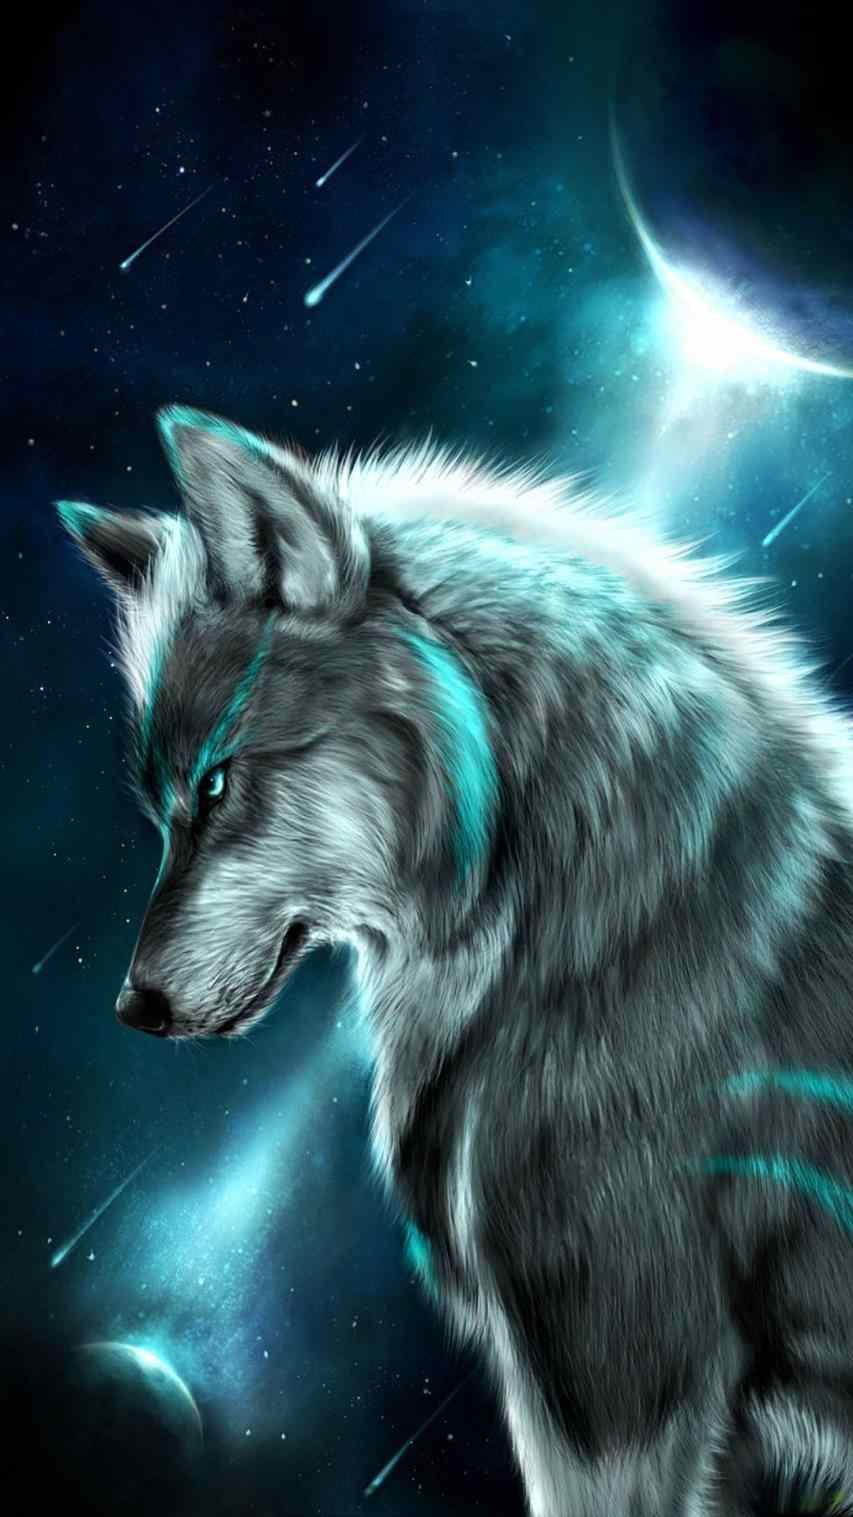 Fantasy beautiful anime wolf d mysterious mystery wallpaper deer